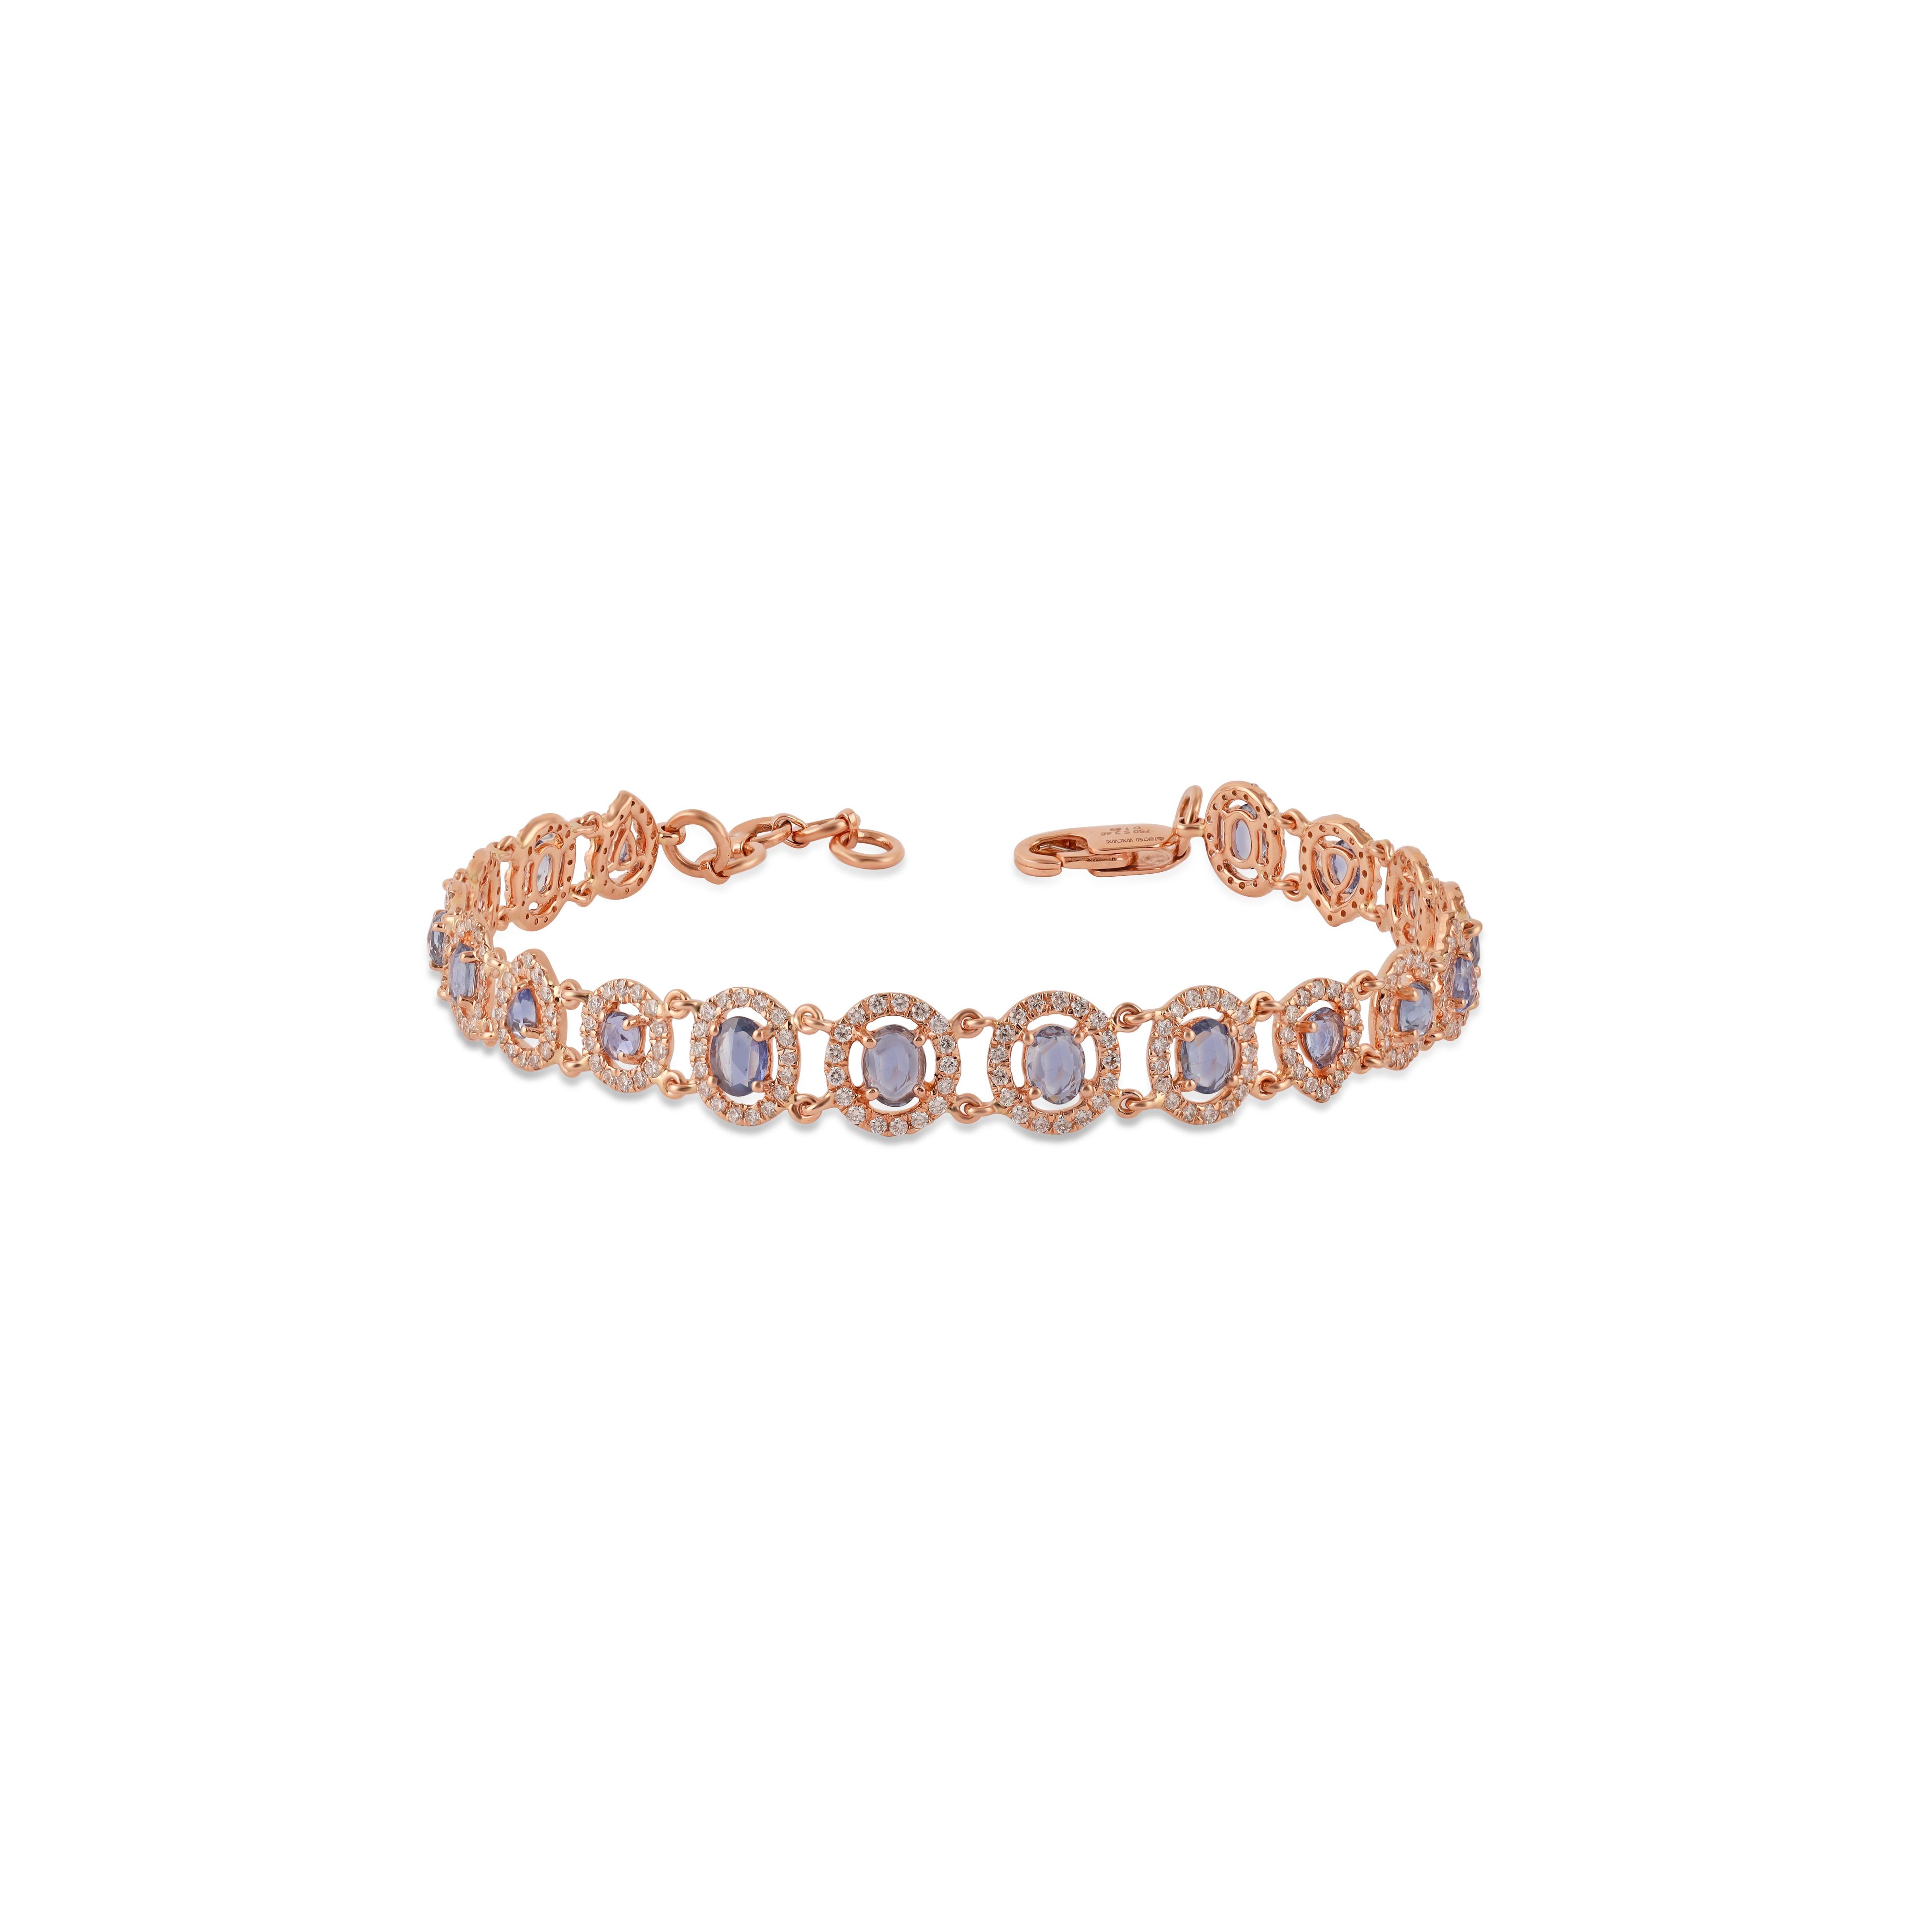 A very beautiful and dainty Sapphire Chain Bracelet let in 18K Rose Gold & Diamonds. The weight of the Multi Sapphires is 3.46 carats. The weight of the Diamonds is 1.89 carats. Net Gold weight is 8.63 Gram.


Size - regular 6.5